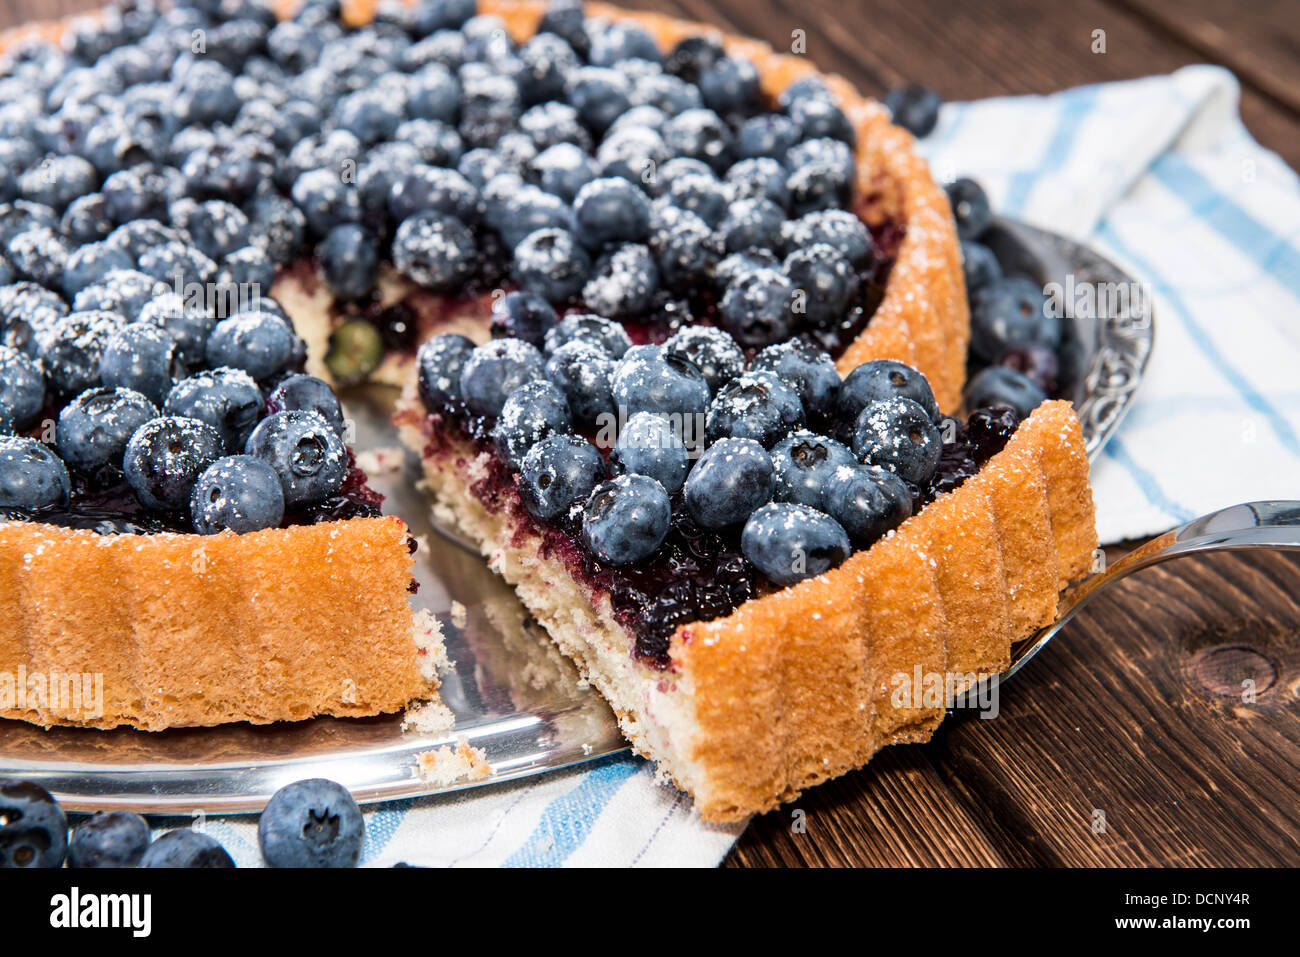 Delicious Blueberry Tart with fresh fruits Stock Photo